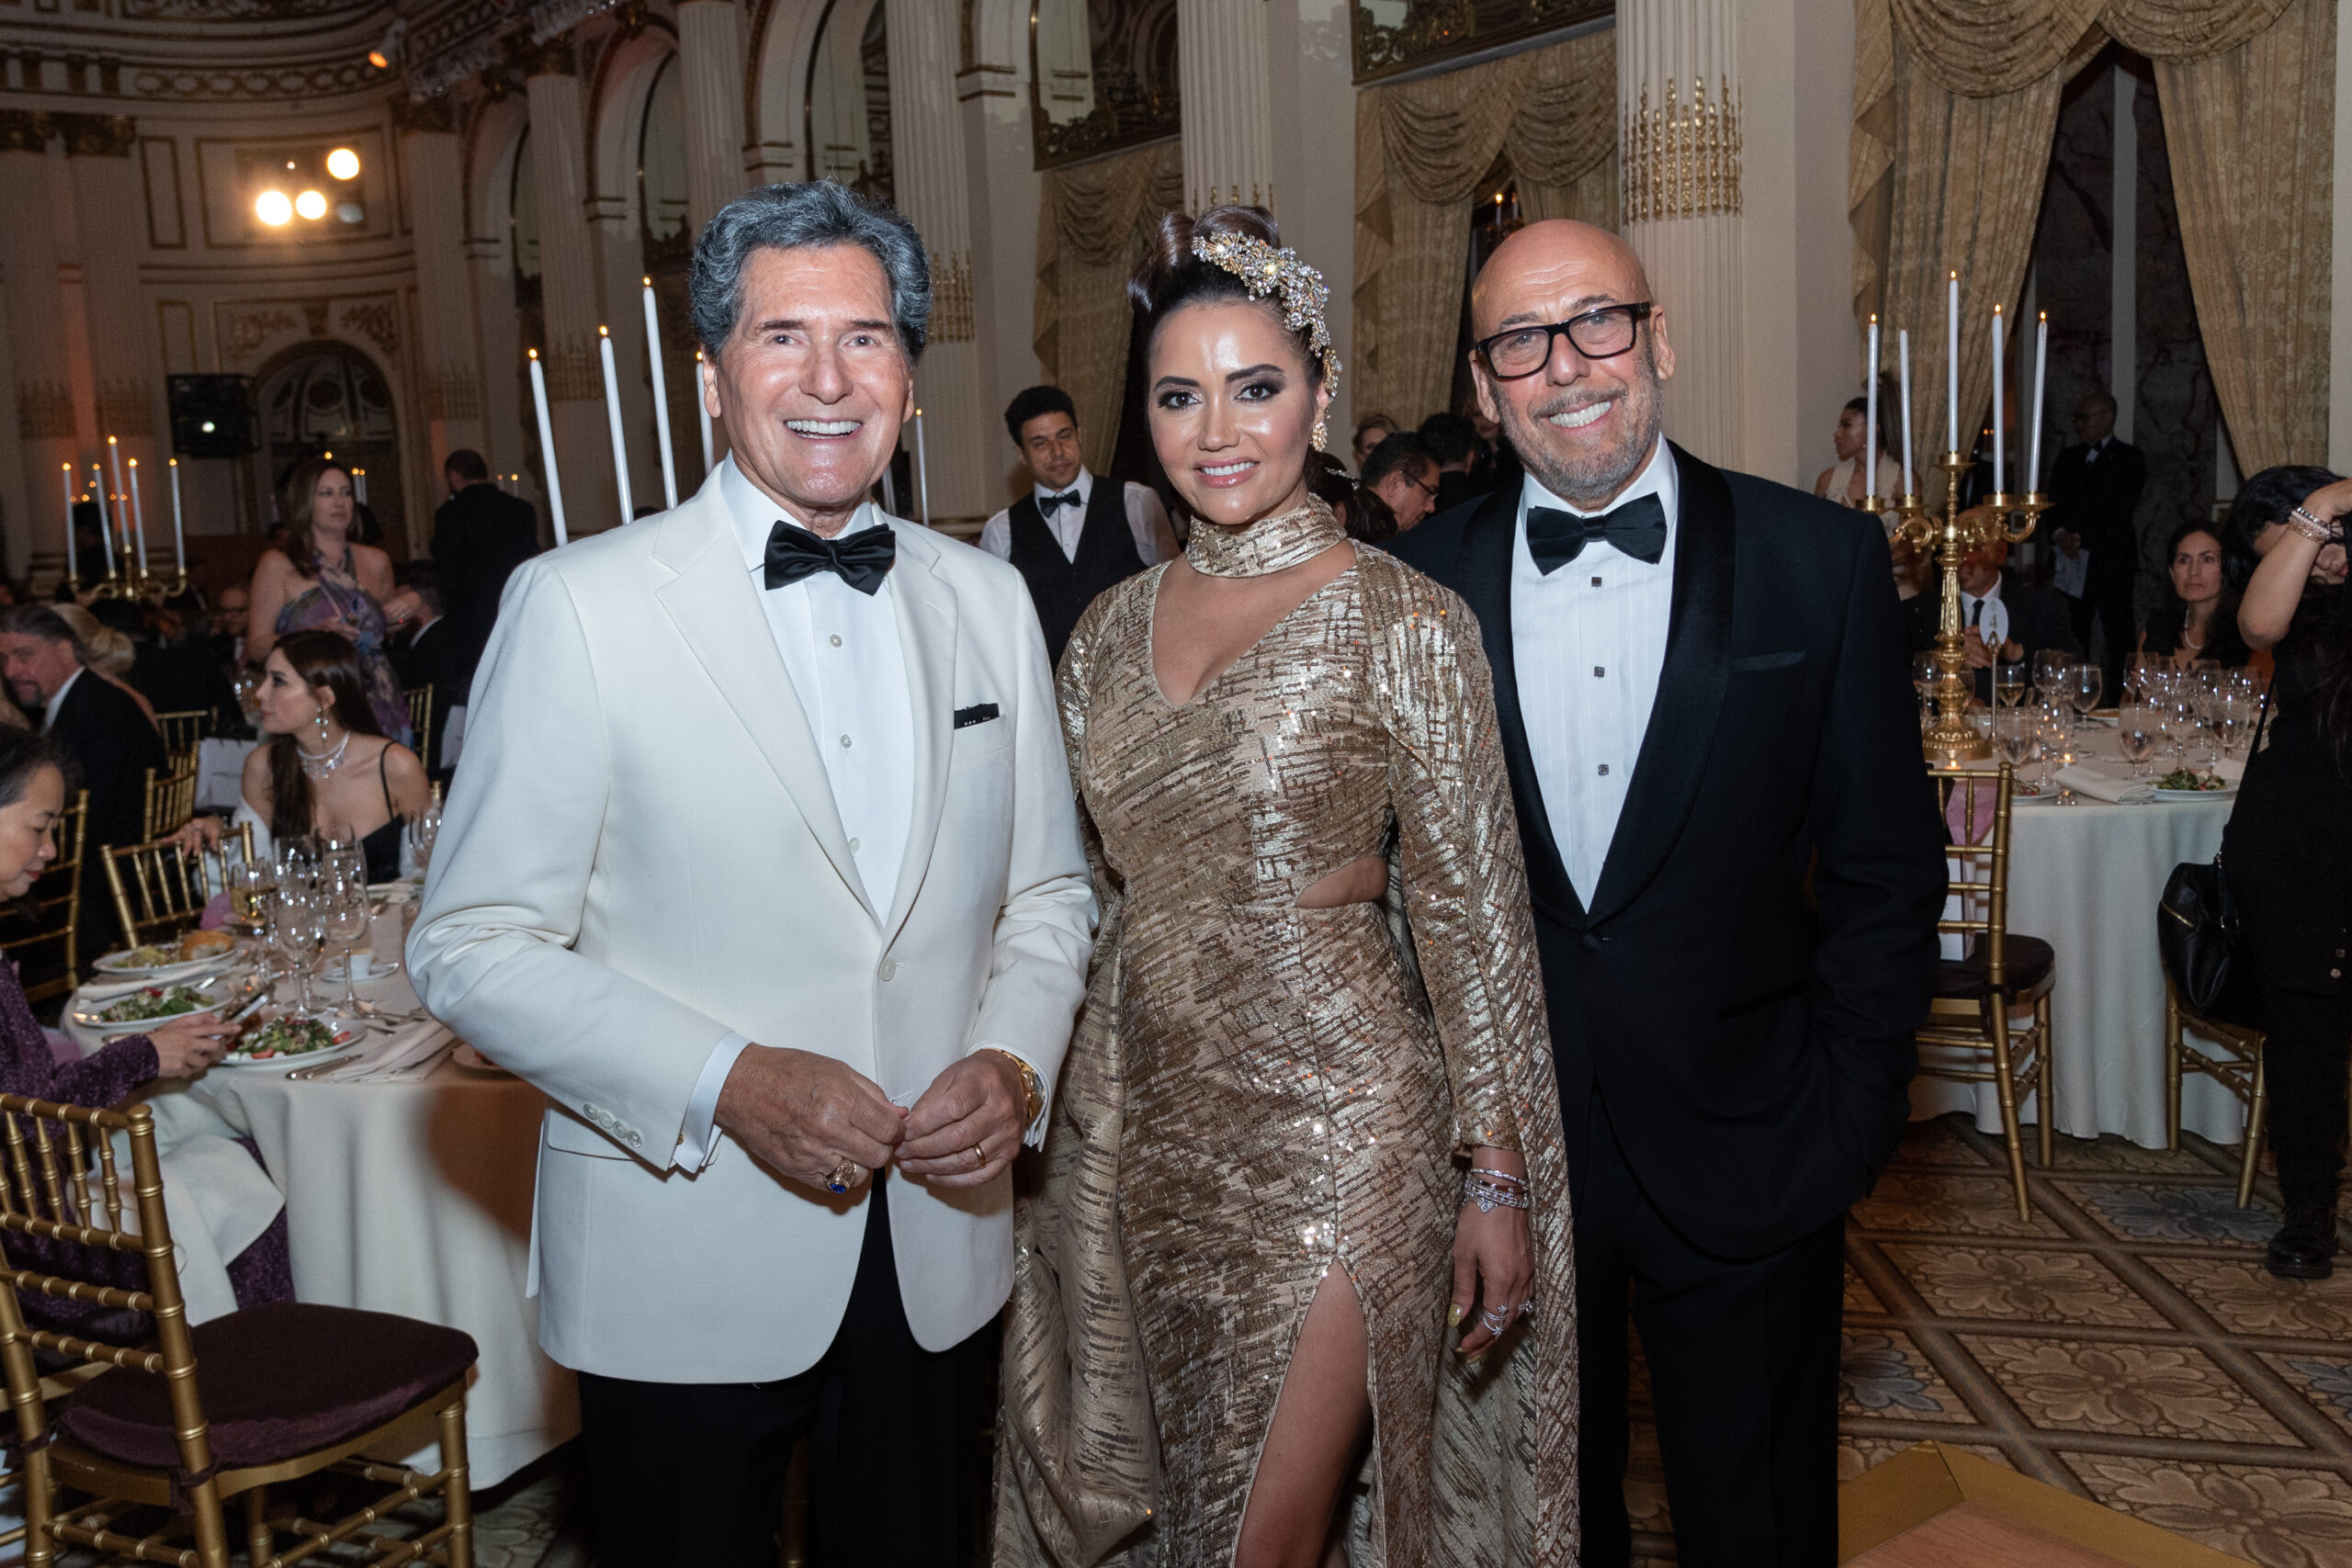 The Luisa Diaz Foundation Celebrates 9th Annual MAG Gala at the Iconic Plaza Hotel